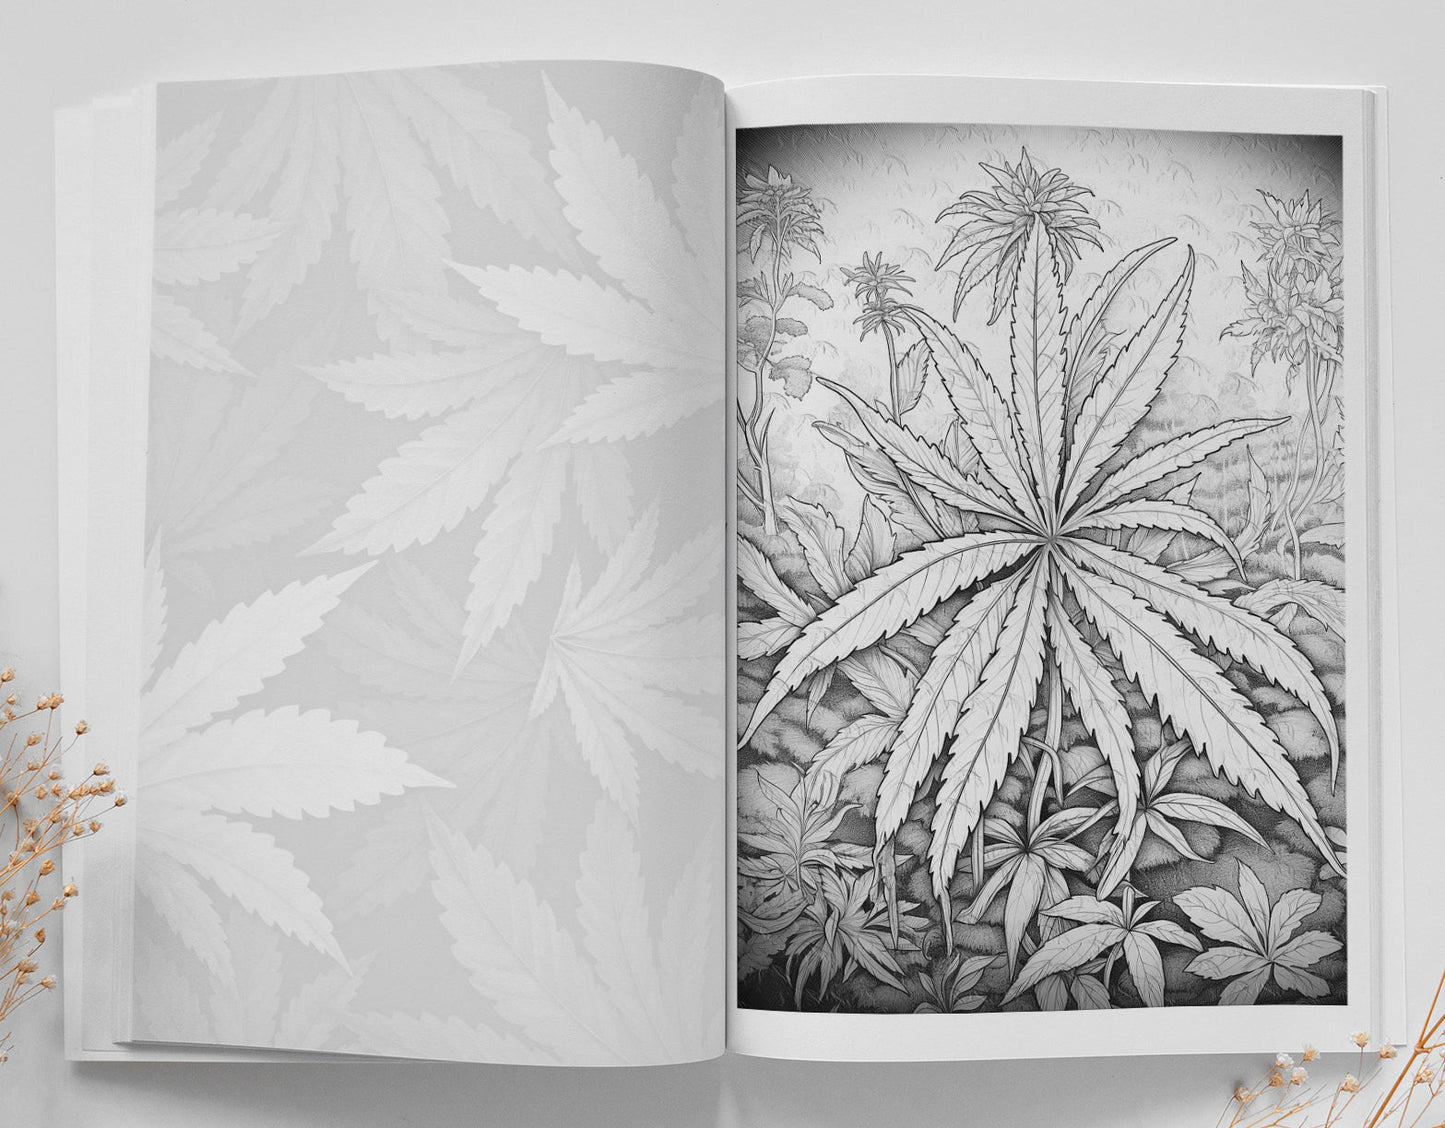 Stoner Coloring Book for Adults Grayscale (Digital) - Monsoon Publishing USA